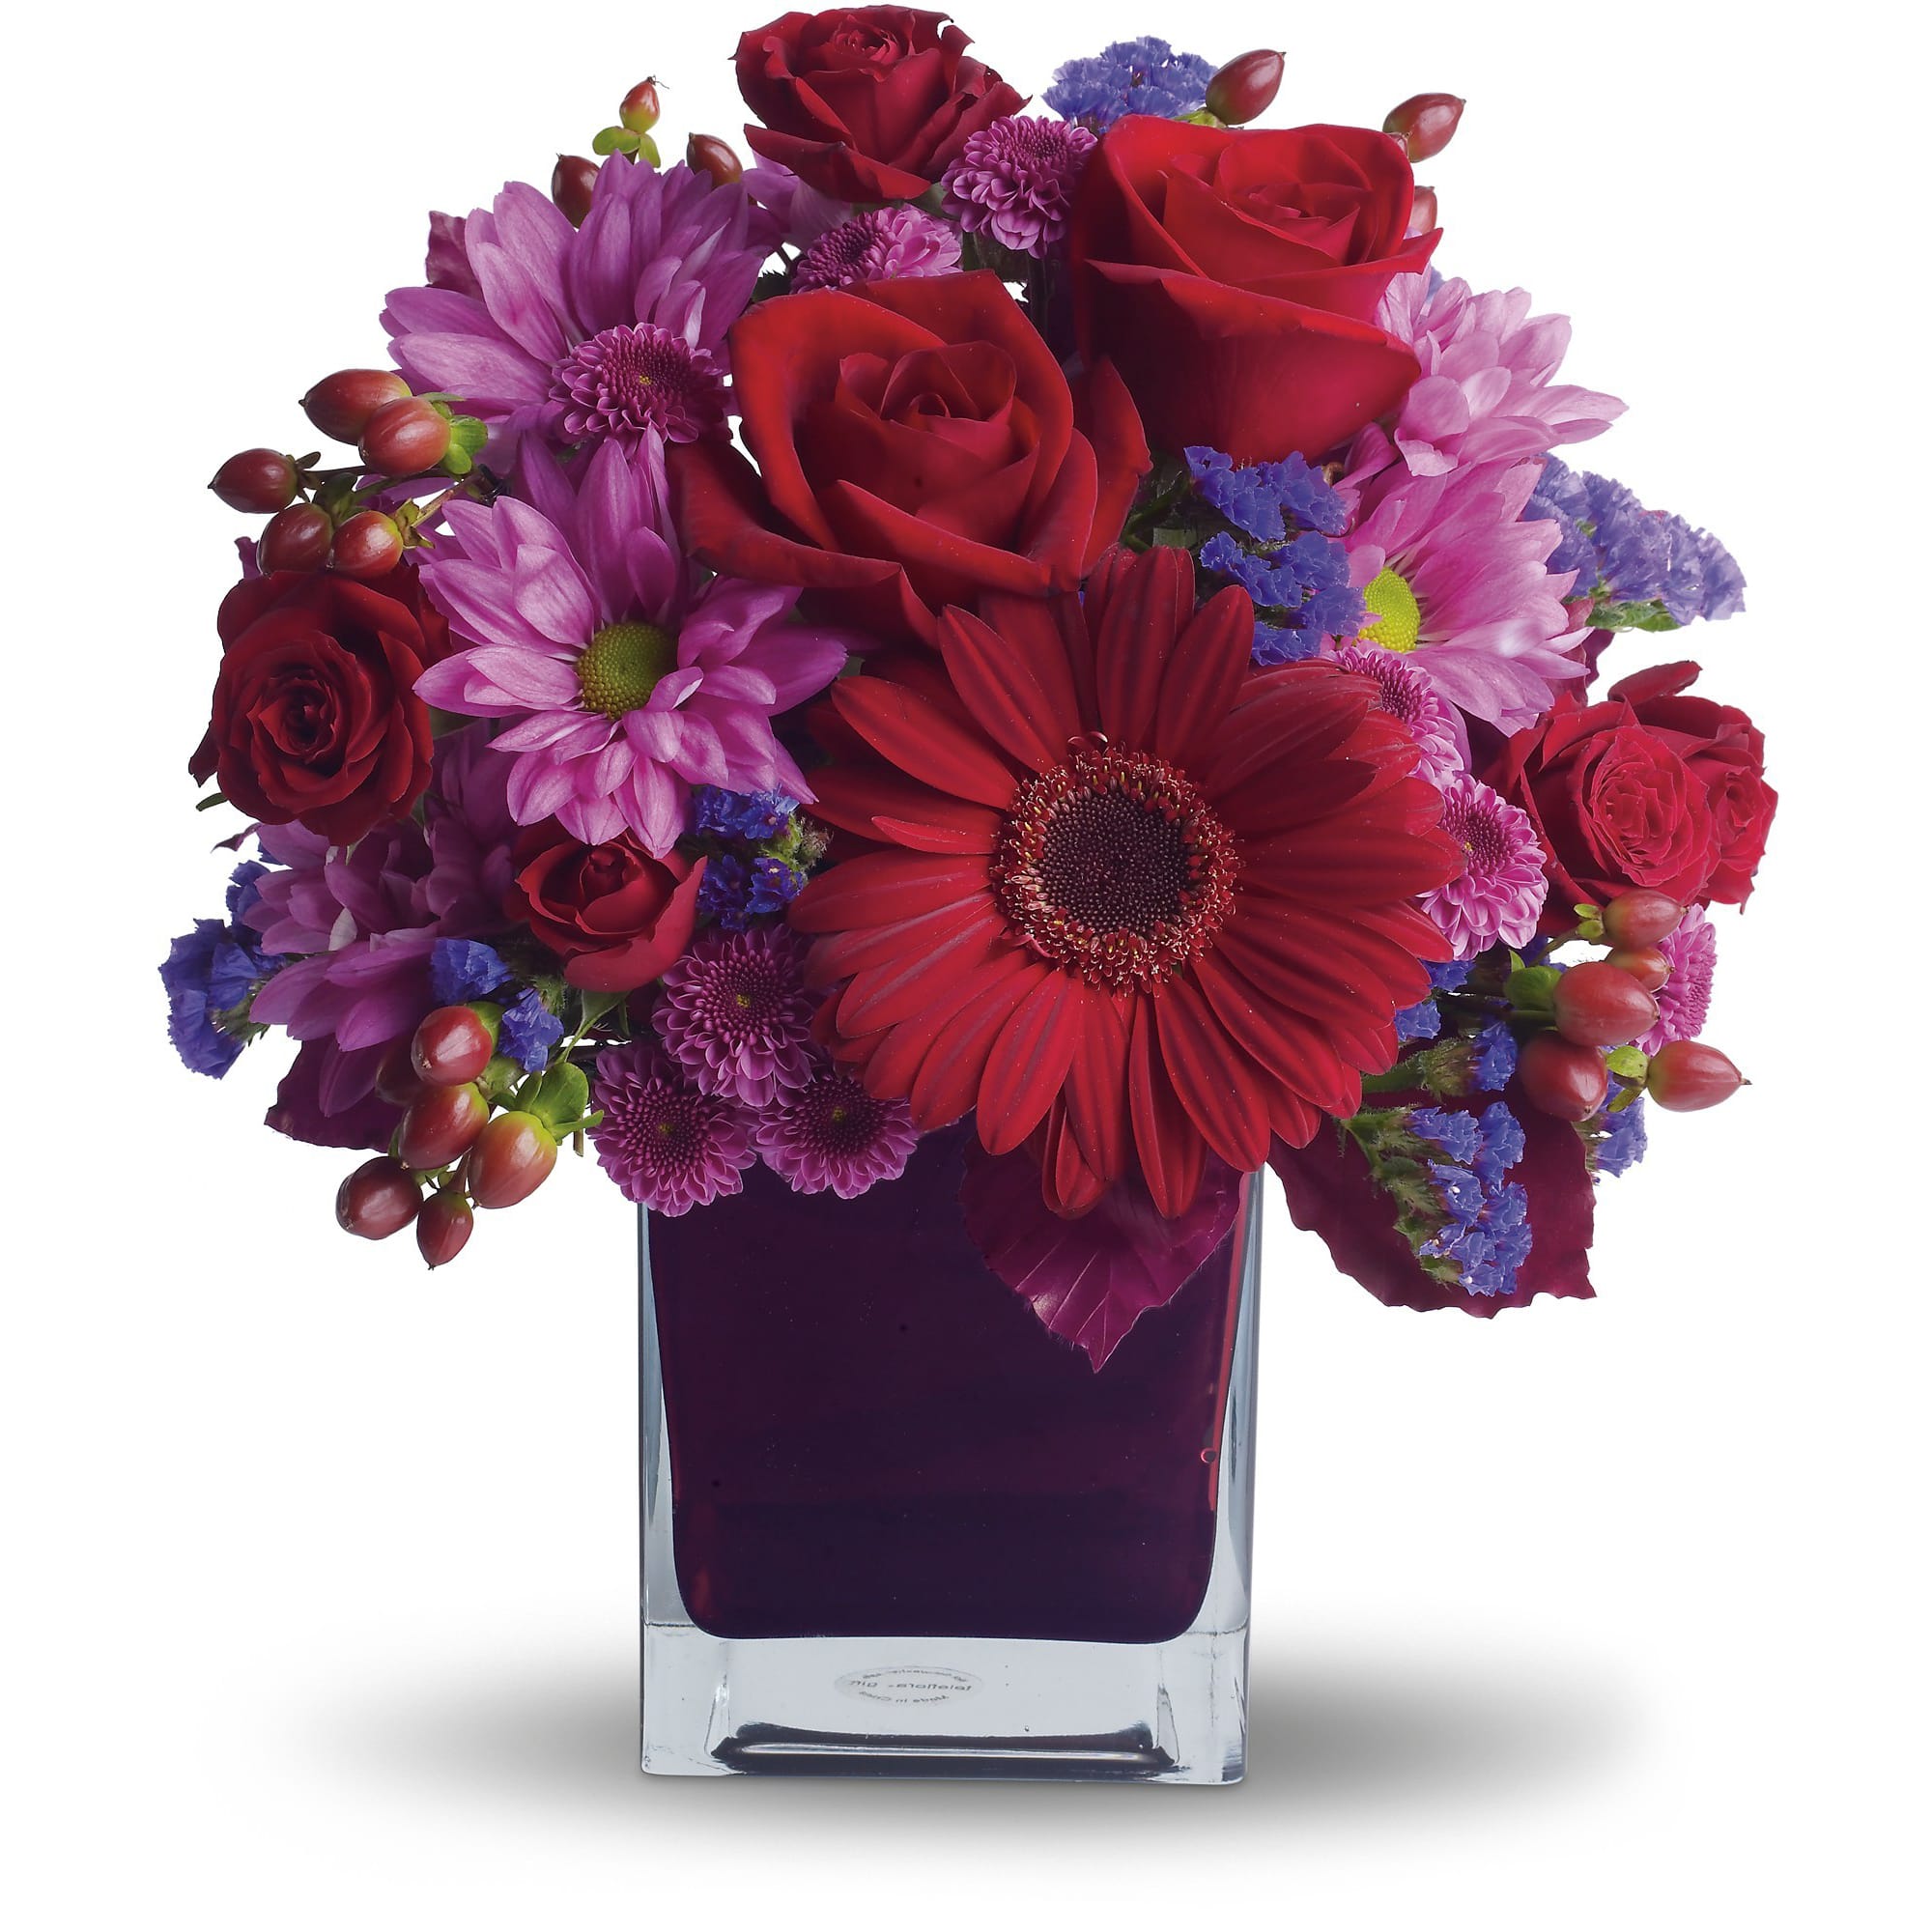 It's My Party by Teleflora - The only crying that this plum party arrangement might inspire are tears of joy! So fabulous. So fun. So fall with its jewel-toned modern cube that's chock full of gorgeous red, purple and perfect flowers.